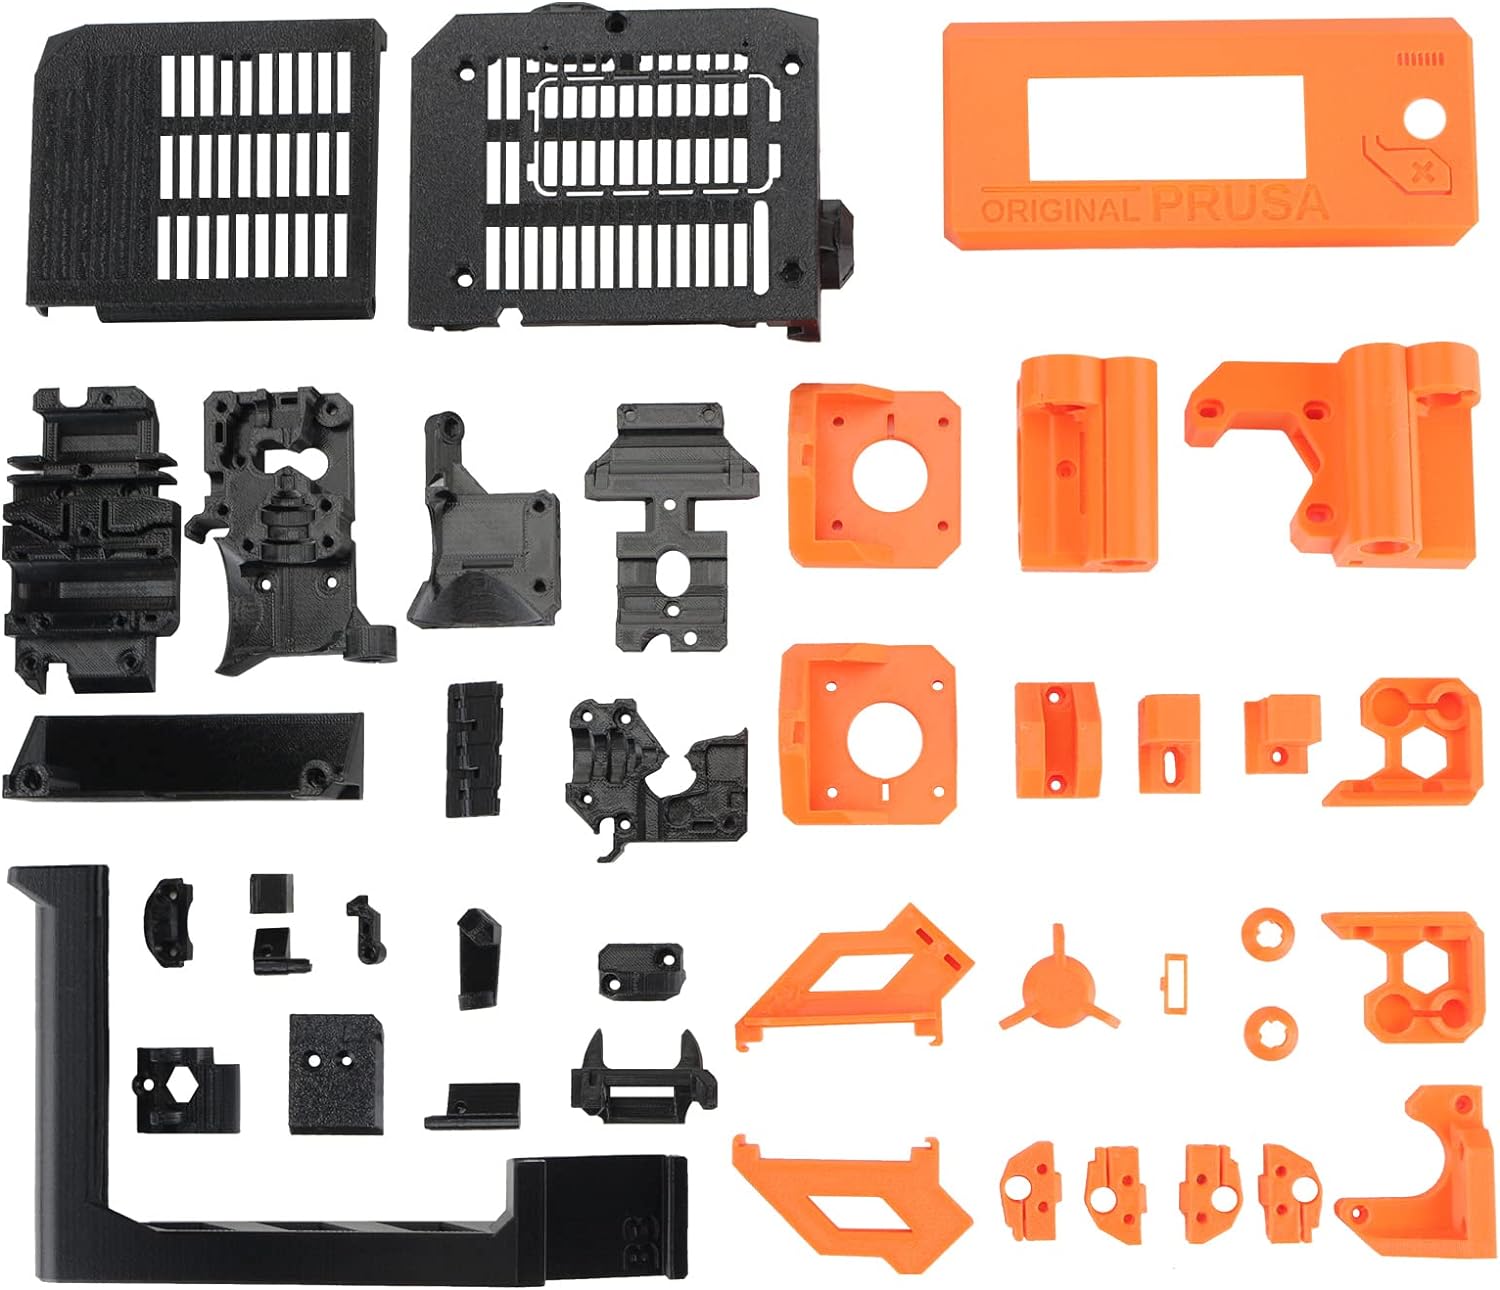 fysetc-prus-i3-mk3s-petg-material-printed-parts-customized-special-3d-printer-kit-for-mk225-mk3-upgrade-to-mk3s-plus-3 FYSETC Prus i3 MK3S+ PETG Material Printed Parts Review